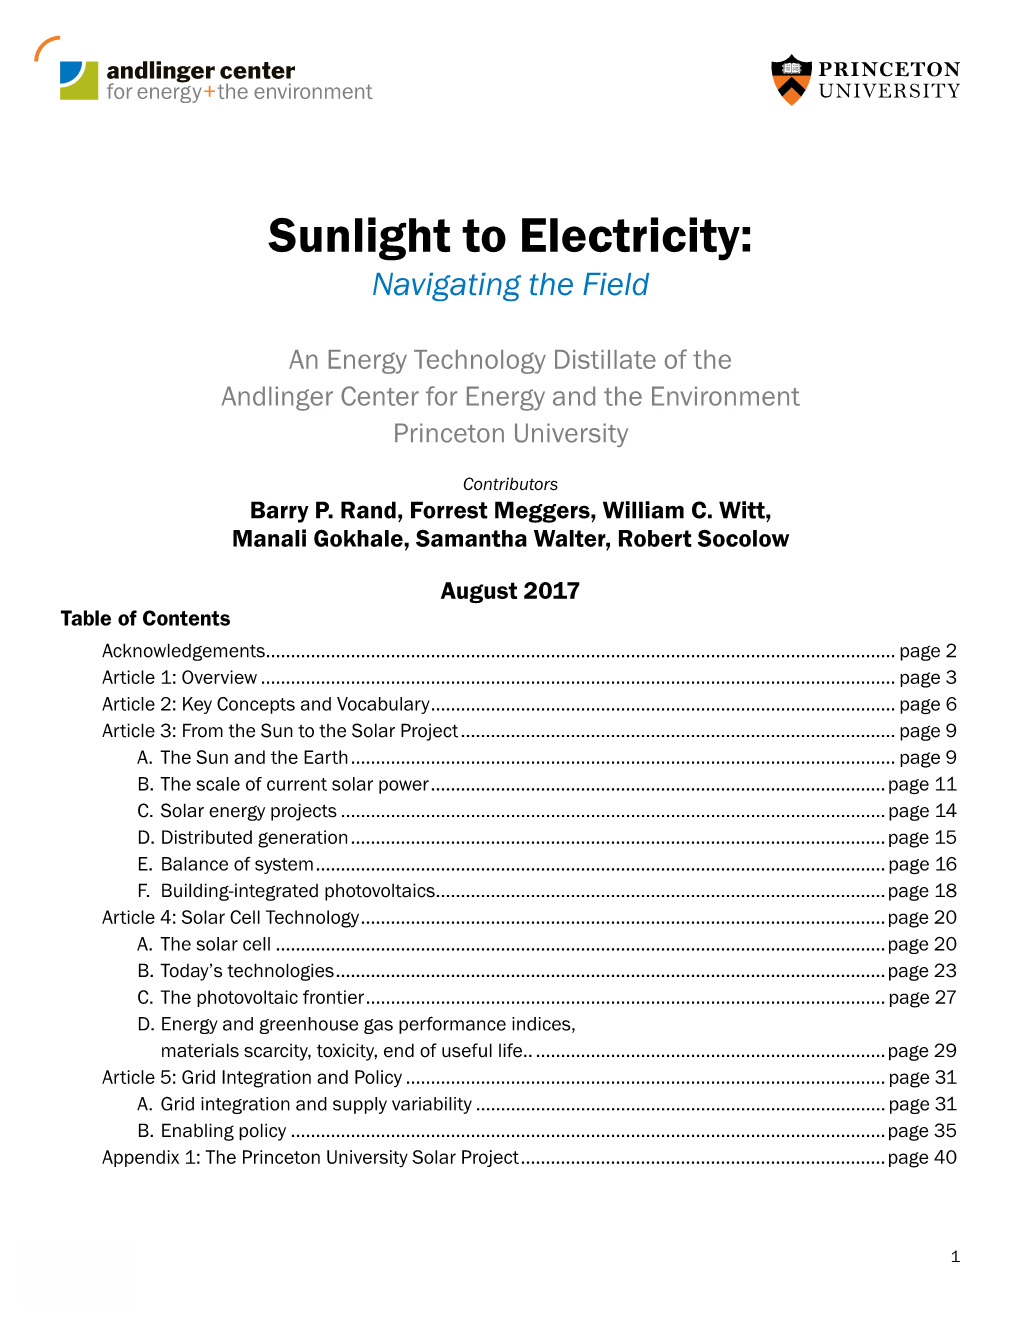 Sunlight to Electricity: Navigating the Field